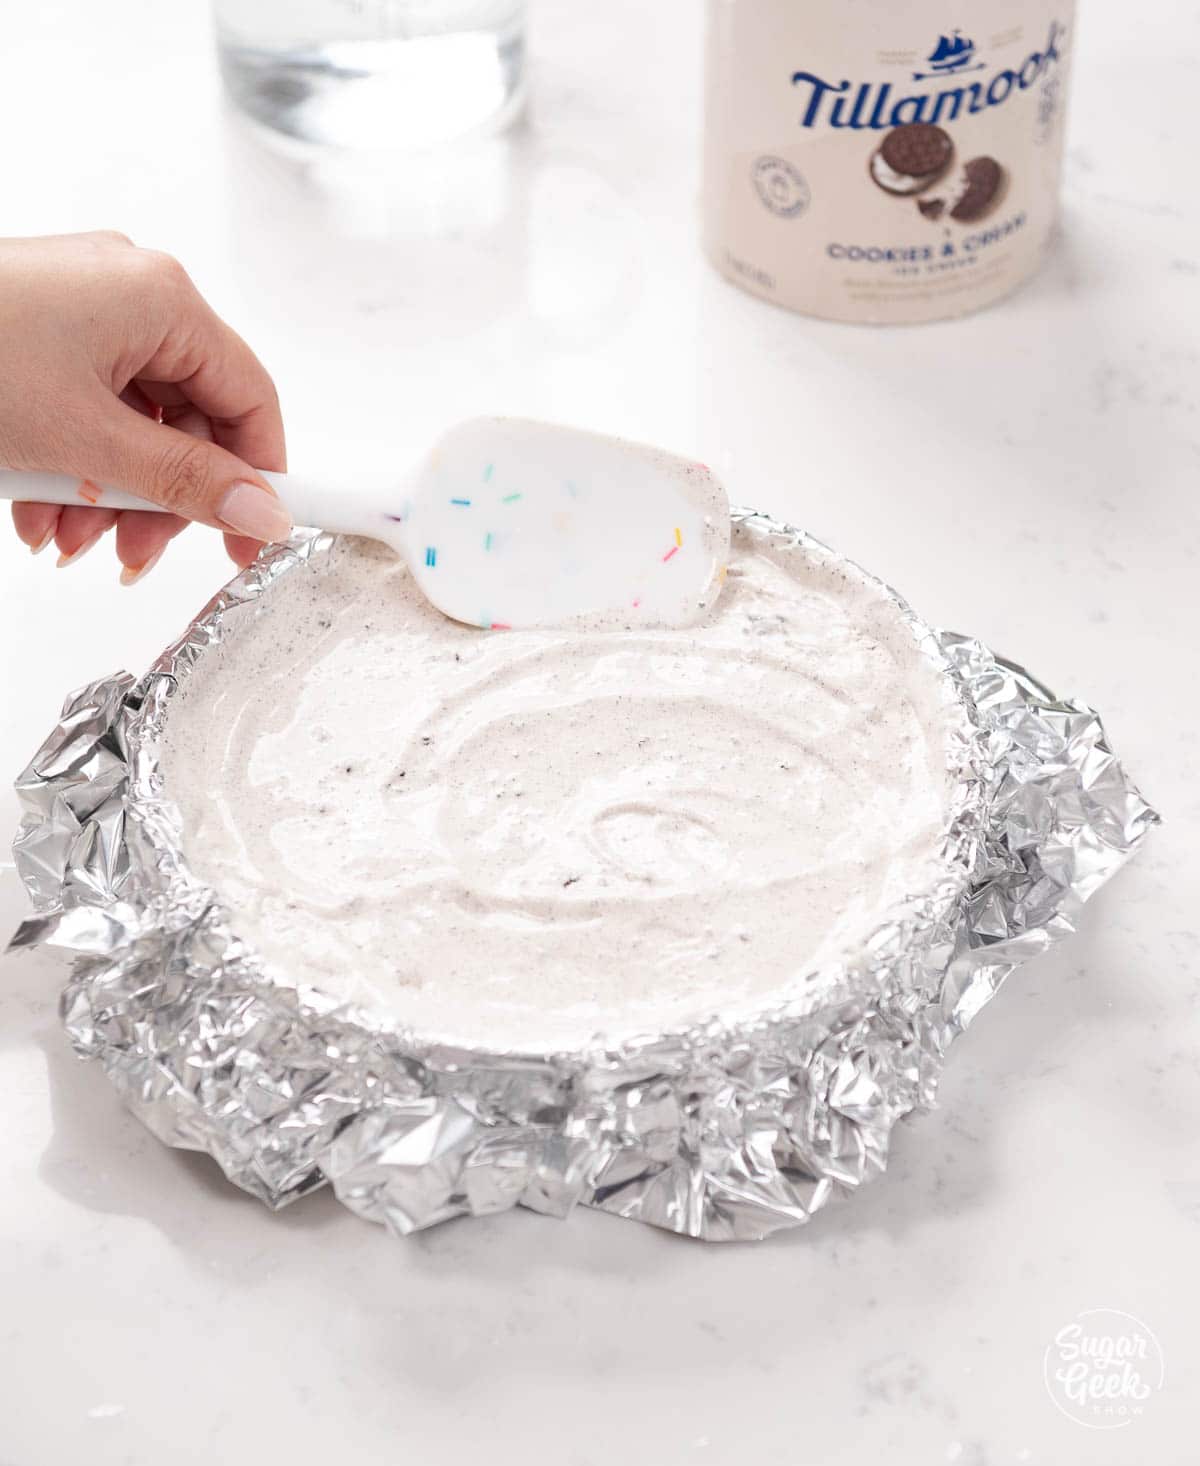 smoothing ice cream in aluminum foil pan with a spatula